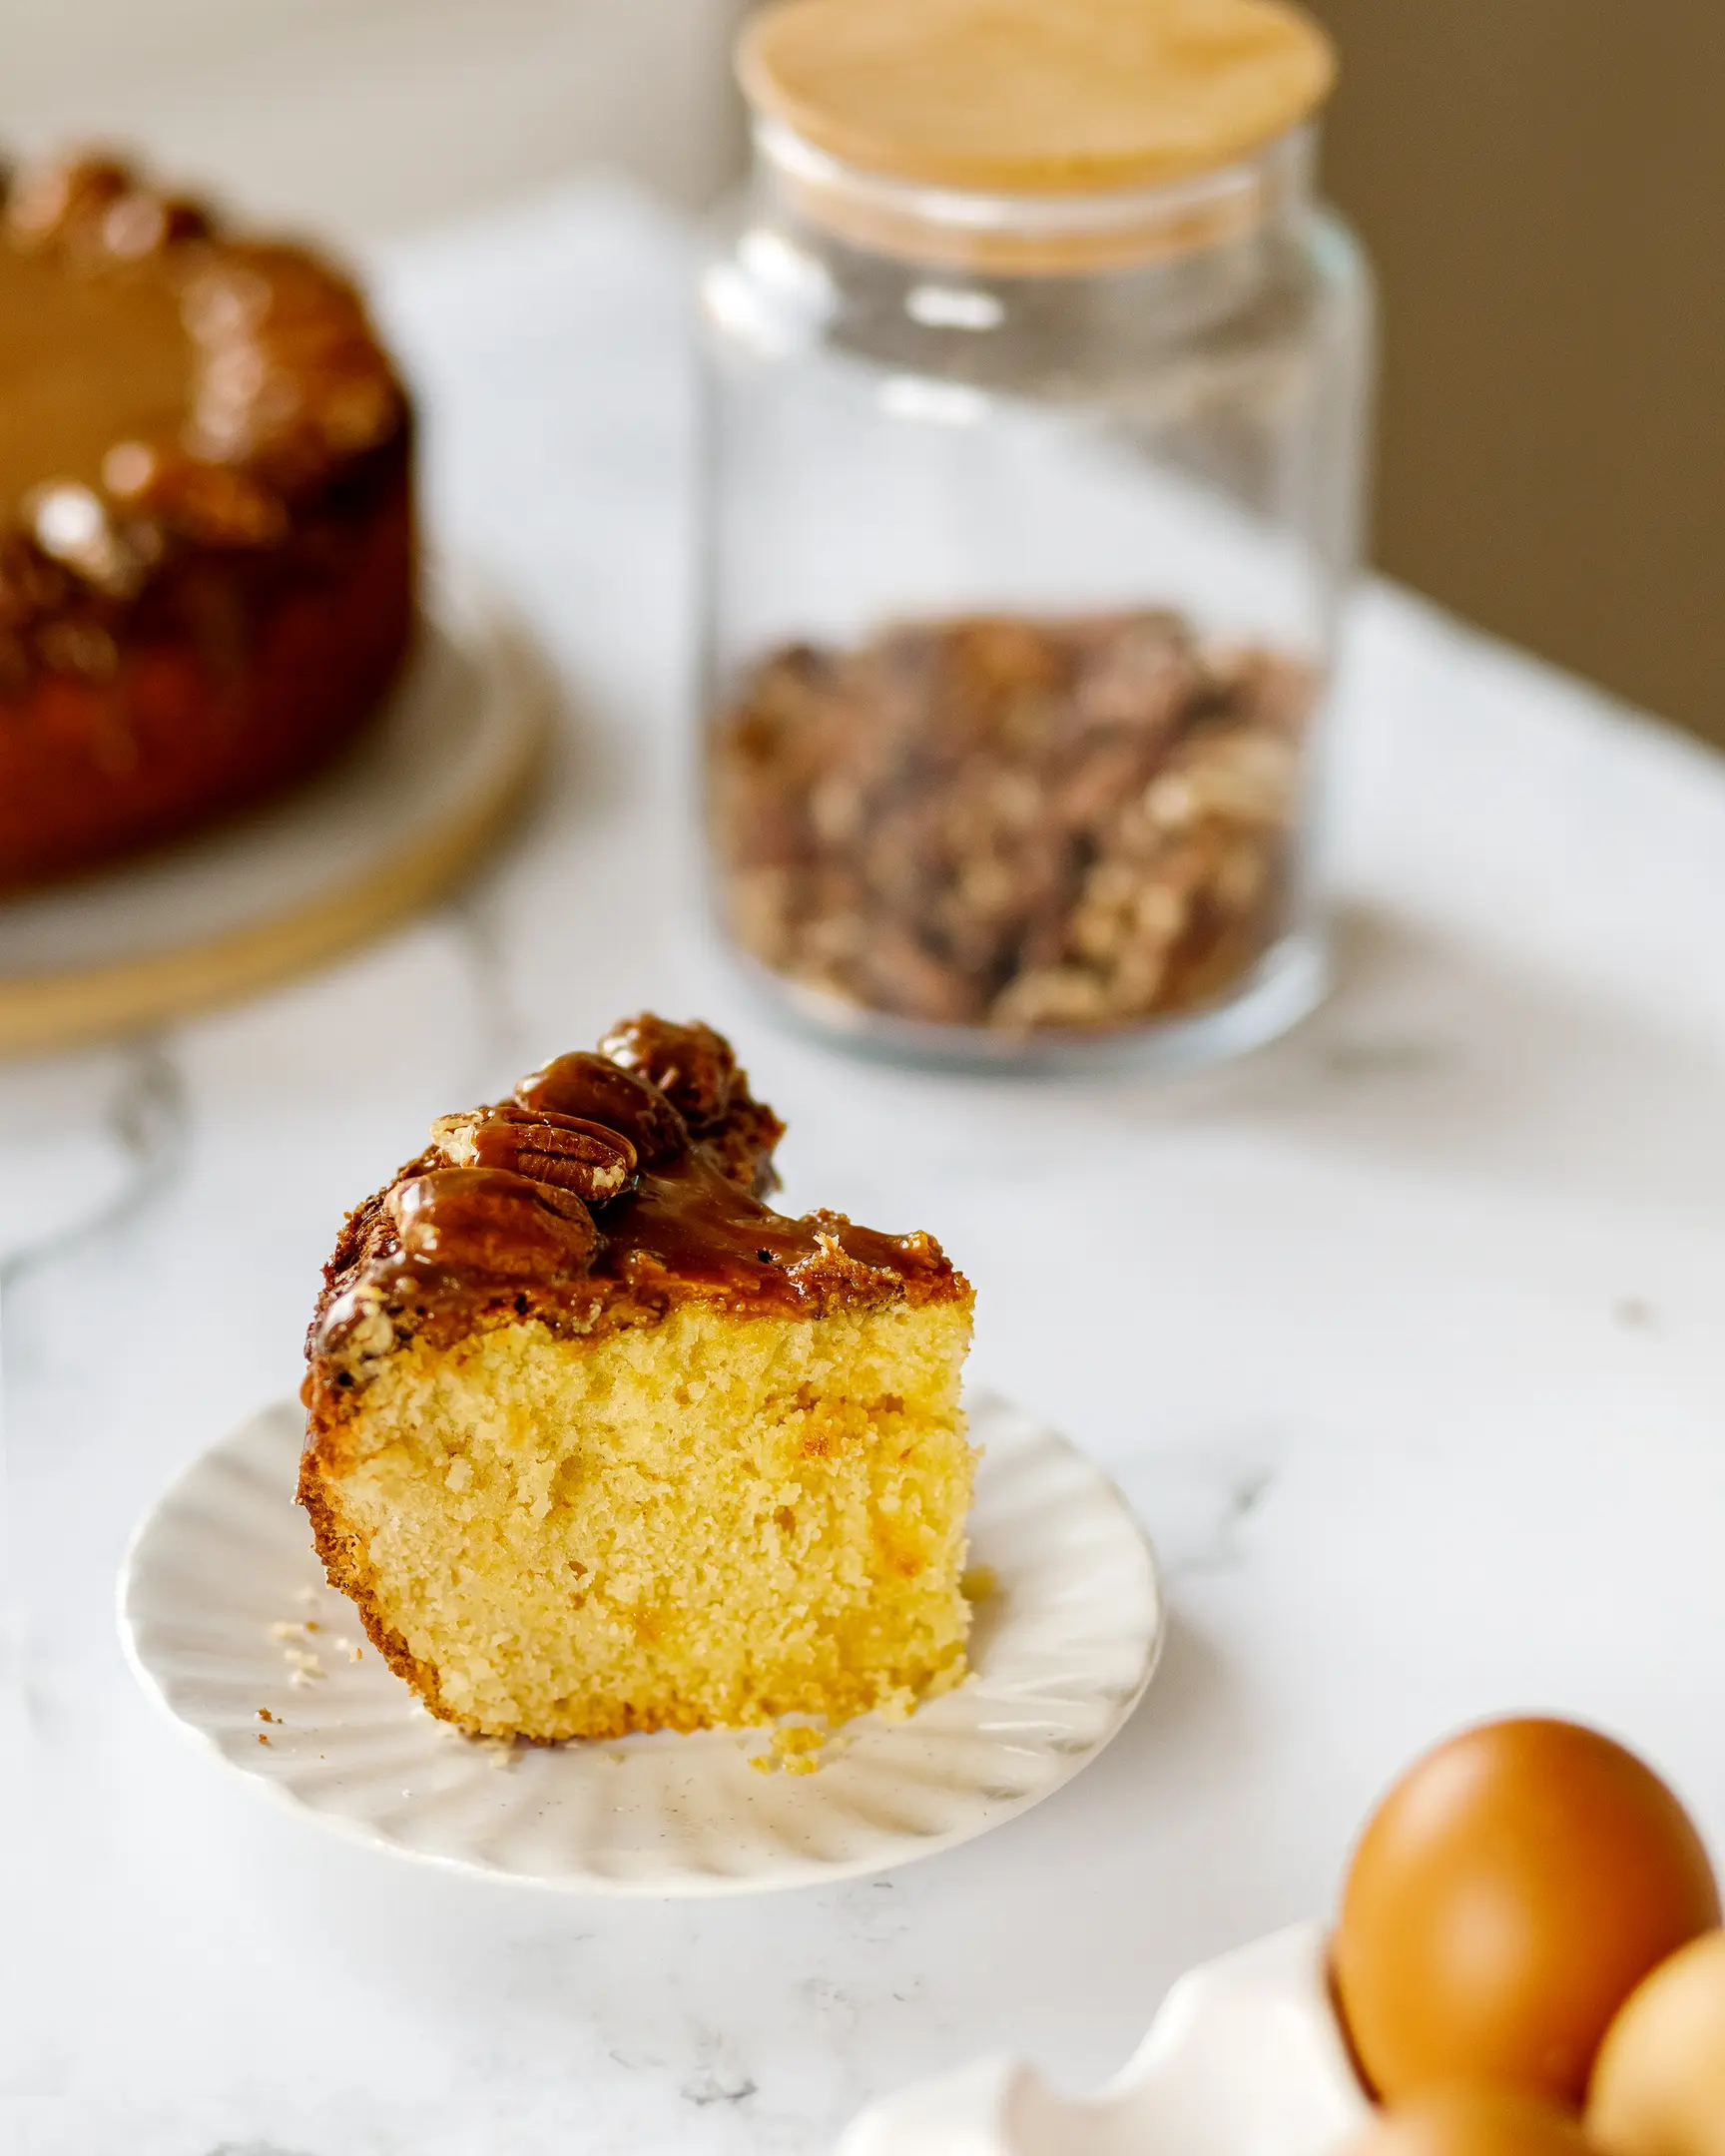 There is a piece of cut pecan cake on the table. There is a piece of cut pecan cake on the table. The cupcake is topped with caramel. In the background you can see a jar of nuts and the pie itself from which this piece was cut. In the foreground there are brown eggs in a light egg cup